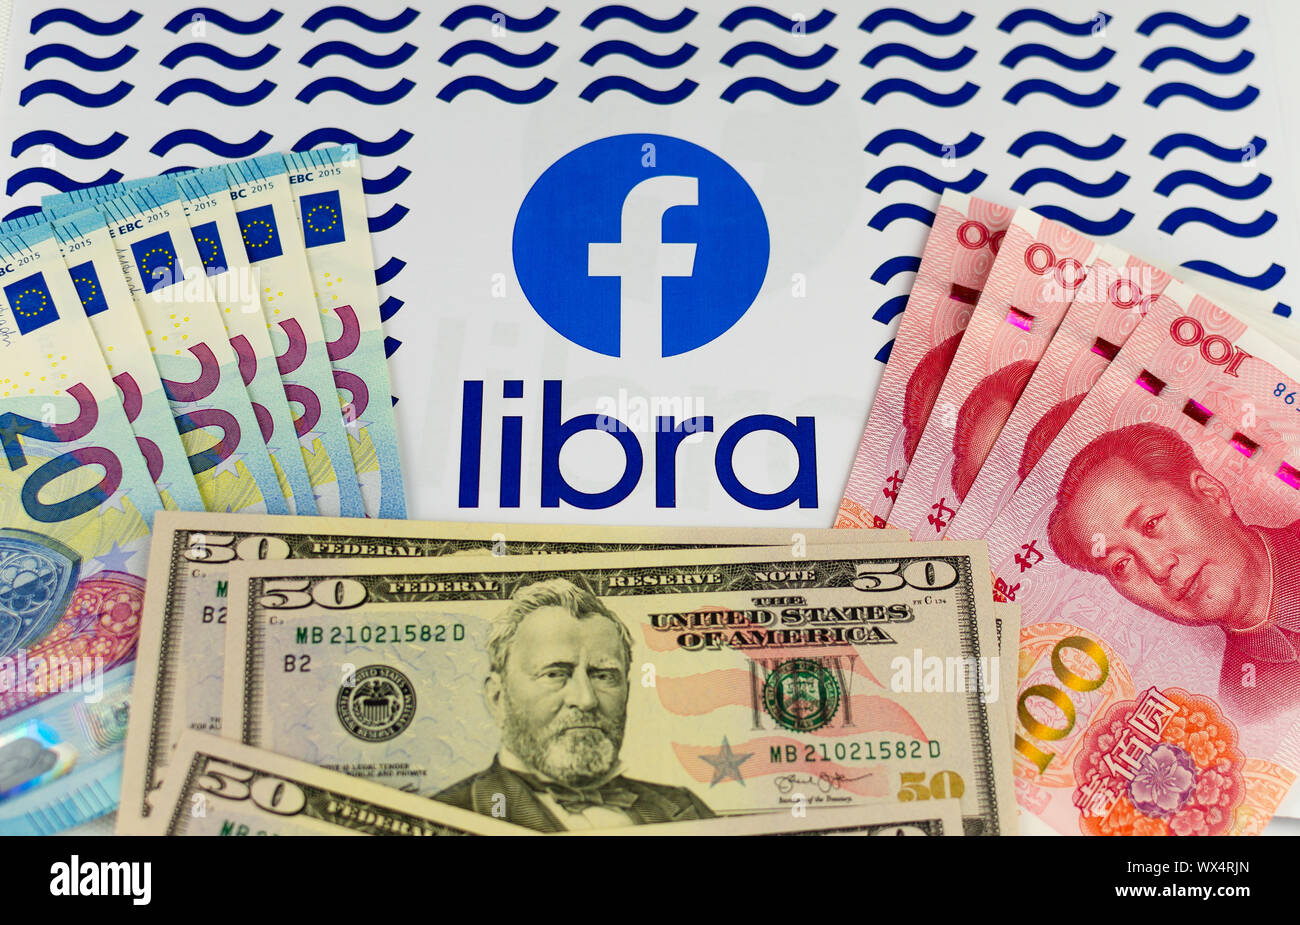 Facebook and Libra logos on the brochure surrounded by US Dollars, Euros and Chinese Renminbi banknotes. Conceptual photo. Stock Photo